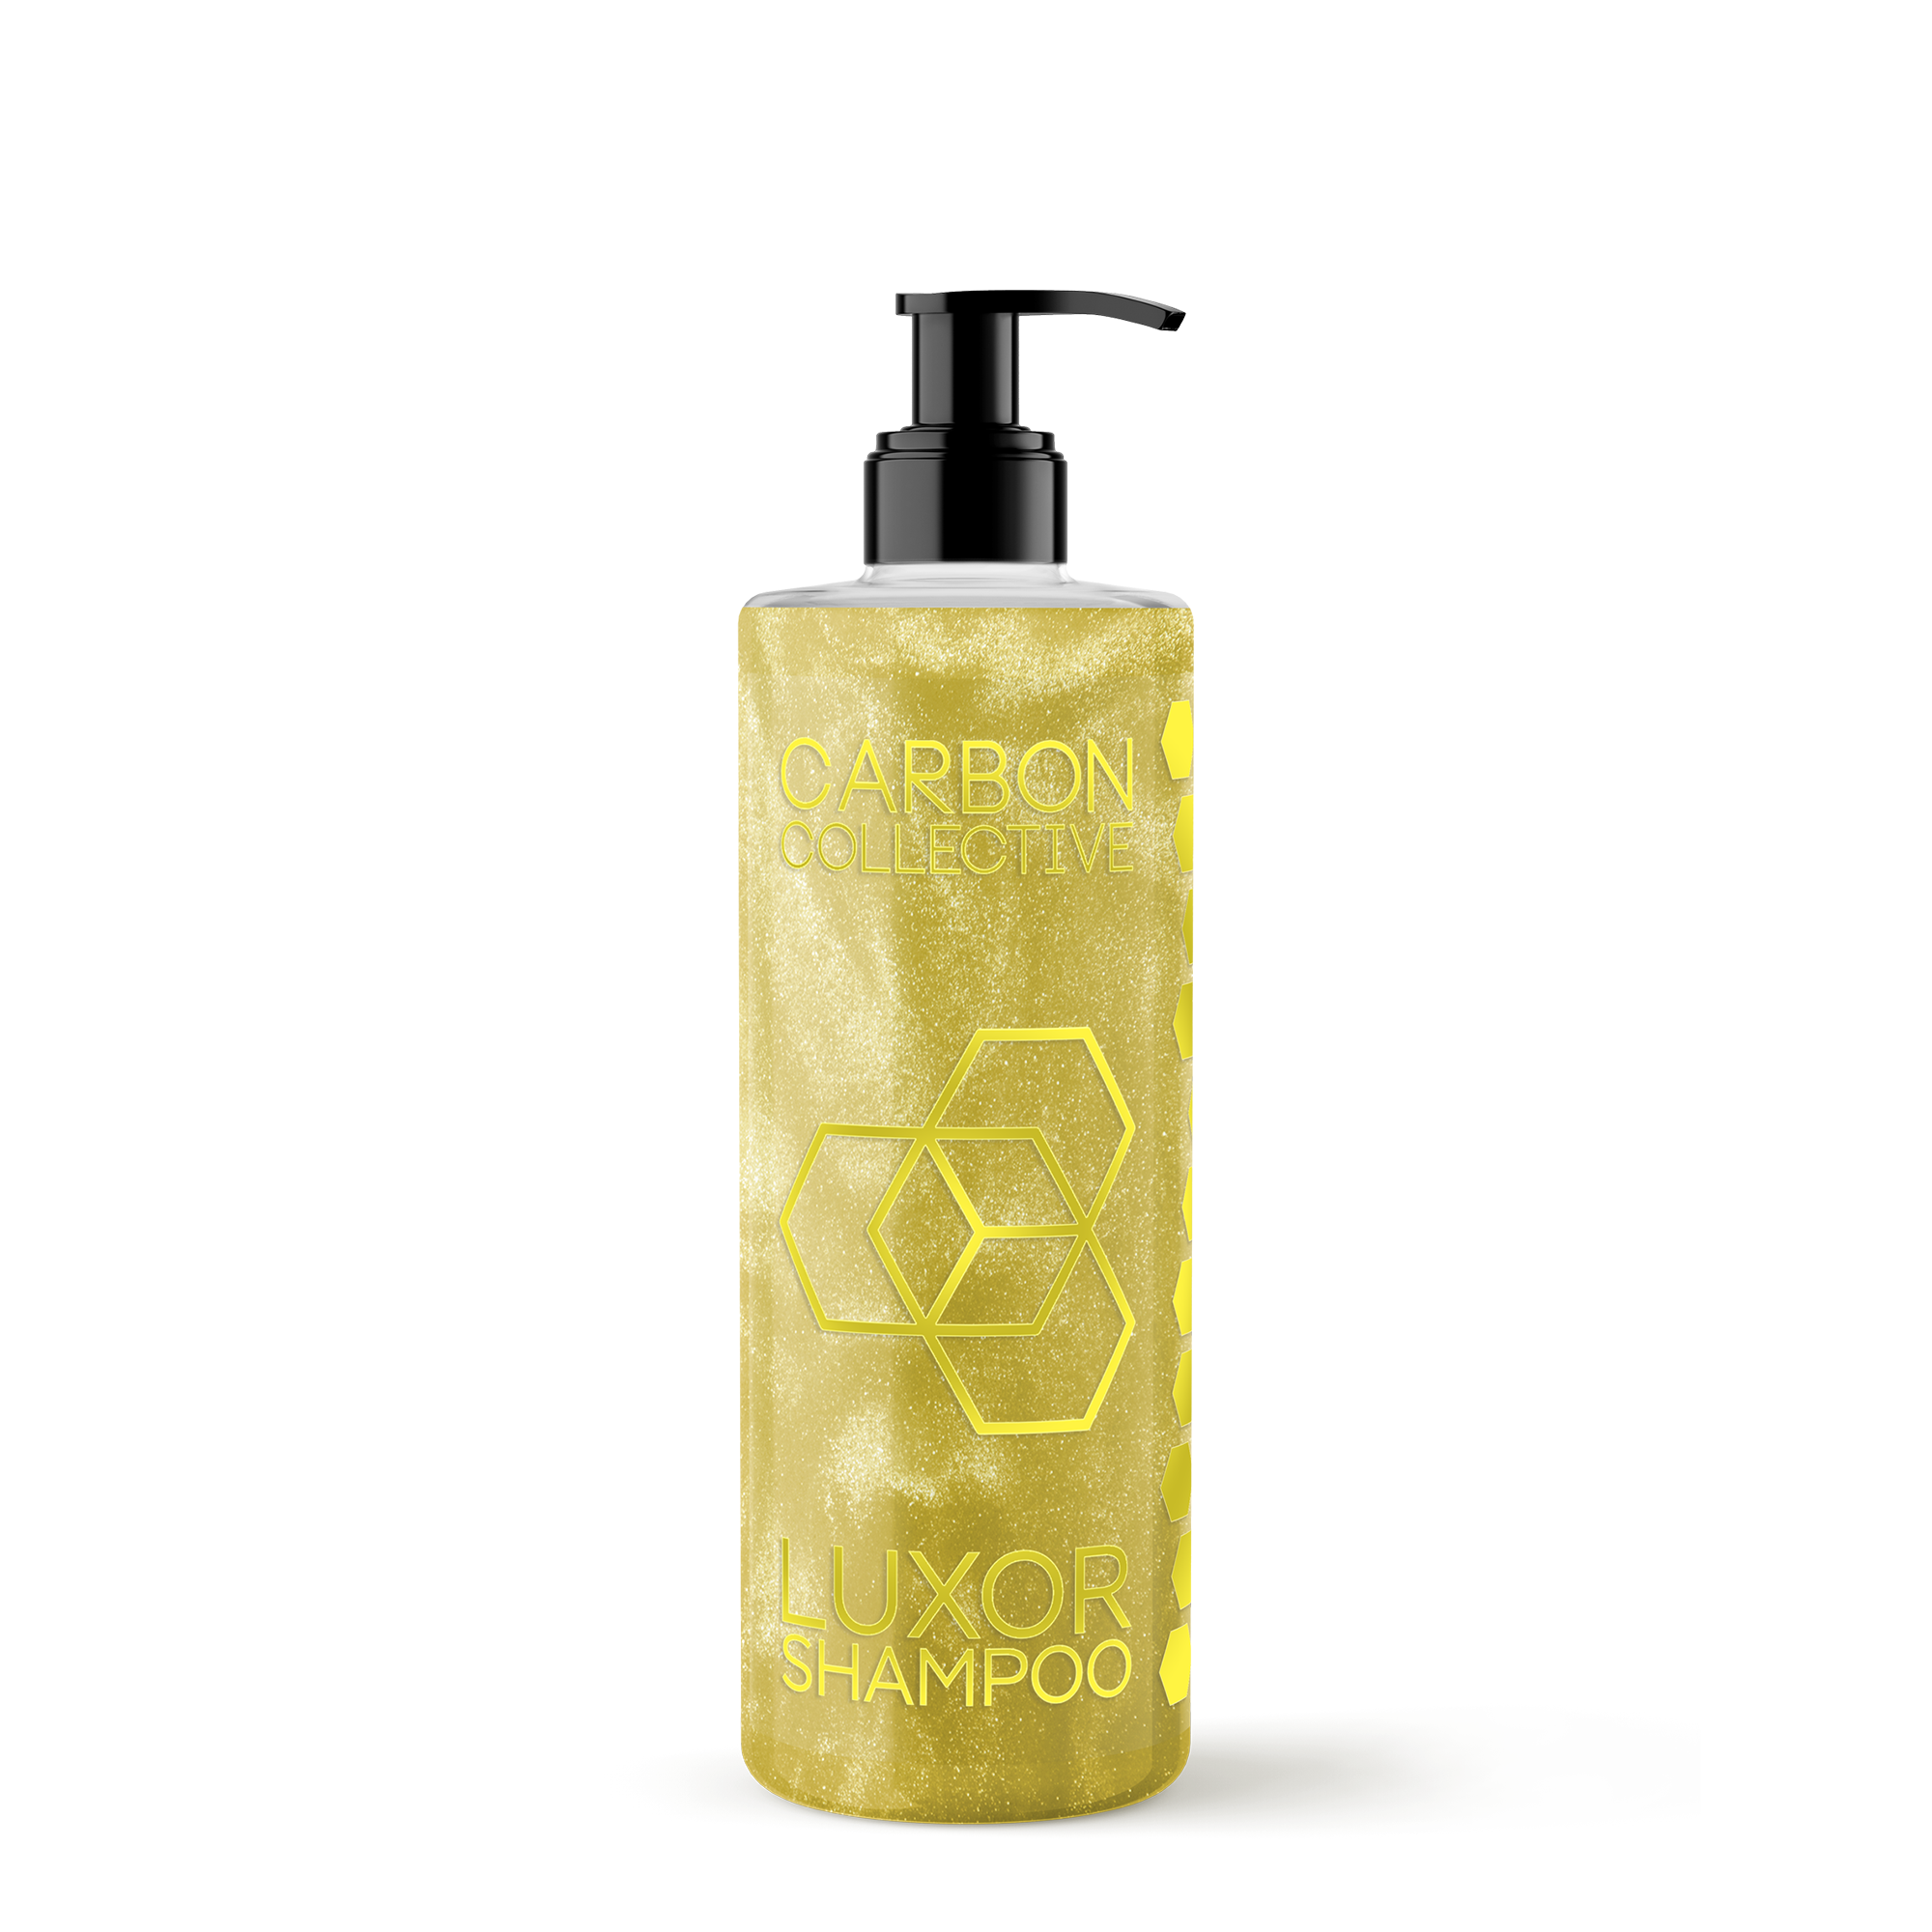 Carbon Collective Luxor Shampoo -  Limited Edition